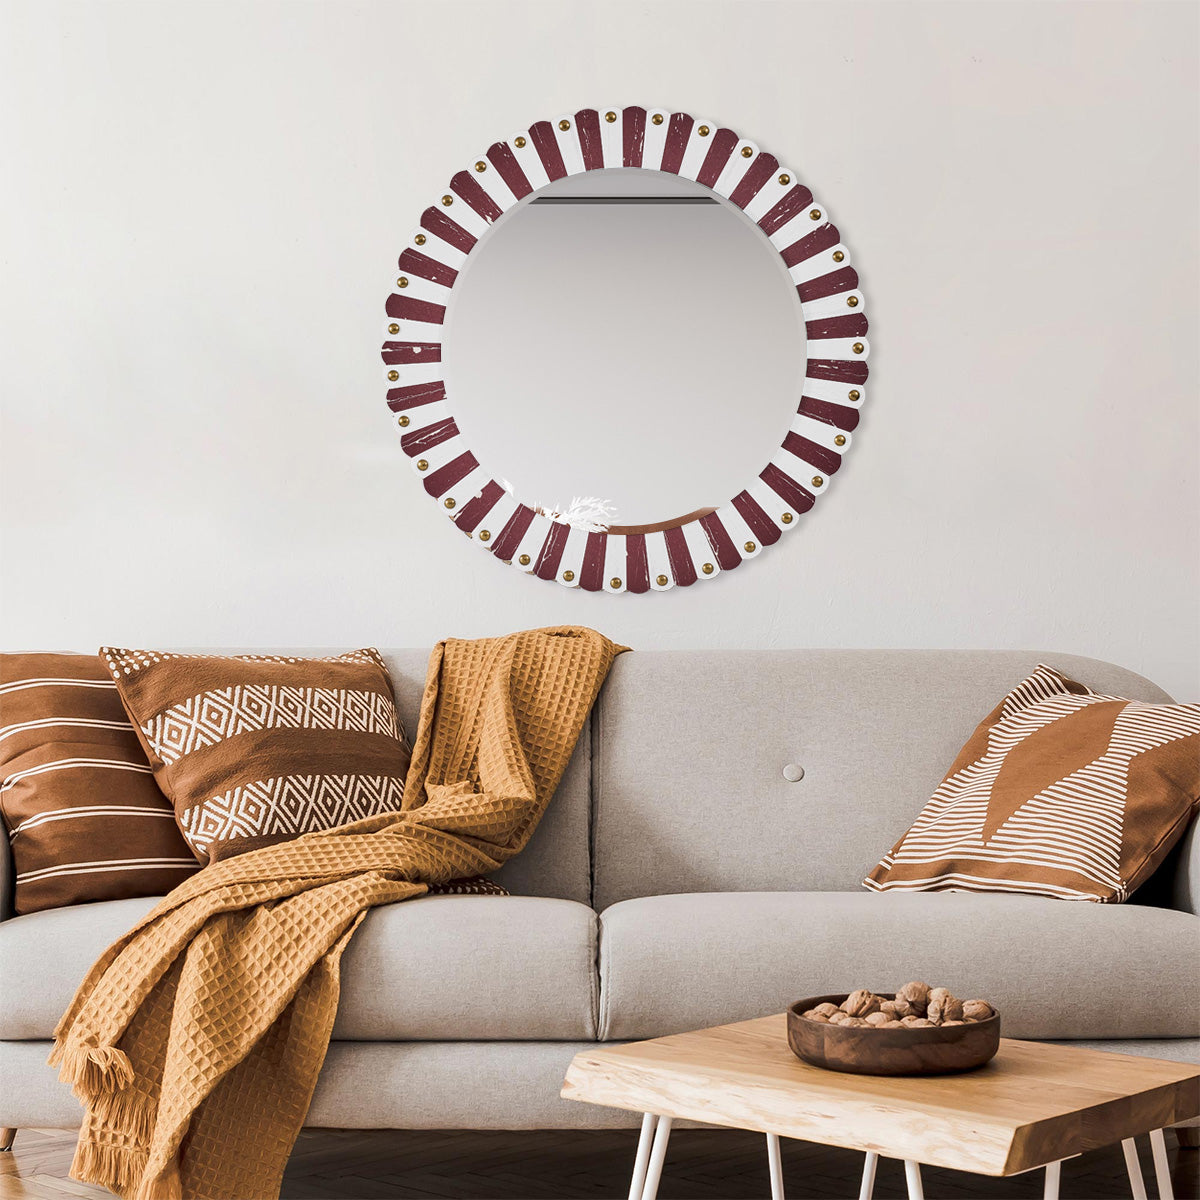 Rustic Wooden Round Wall Mirror Decor Accent Circle Mirror for Living Room, Bedroom, Entry